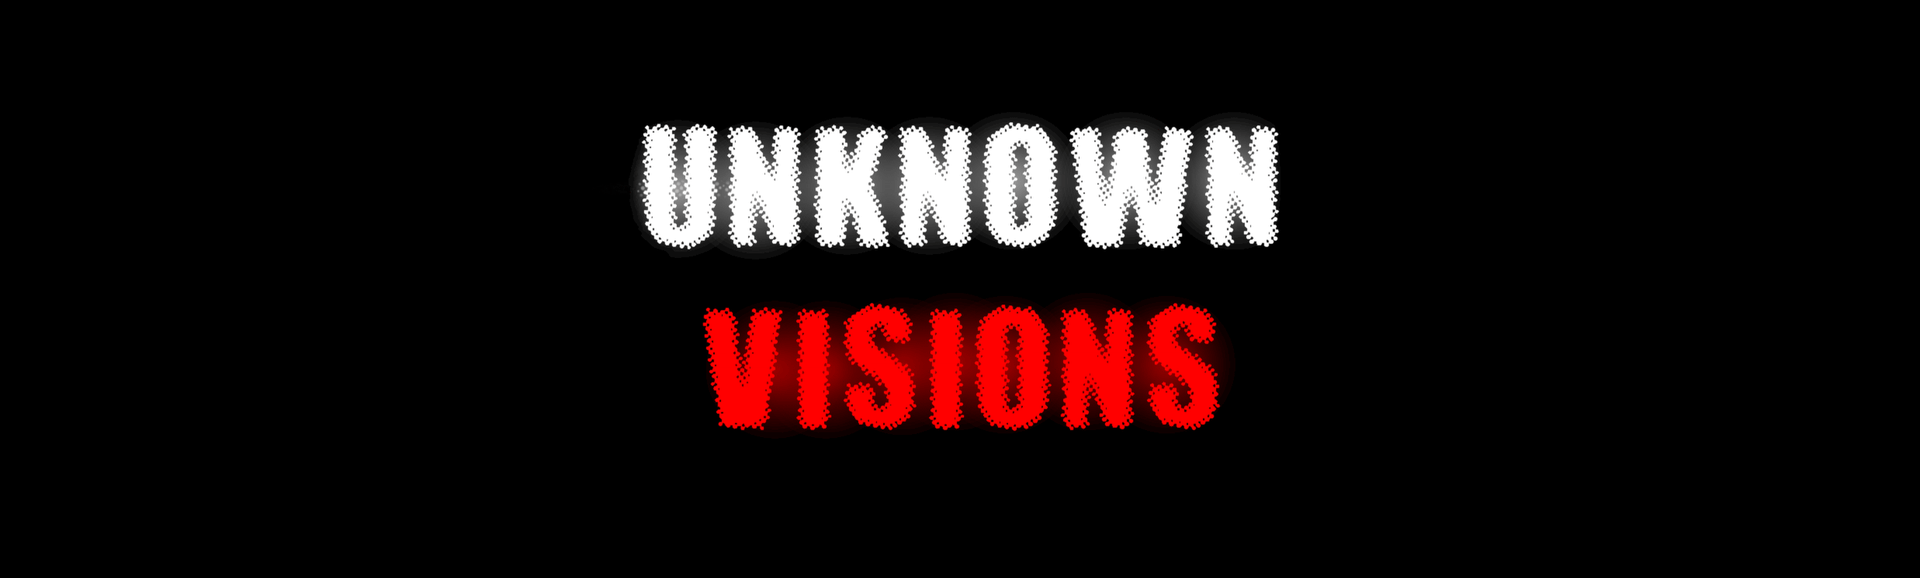 Unknown Visions